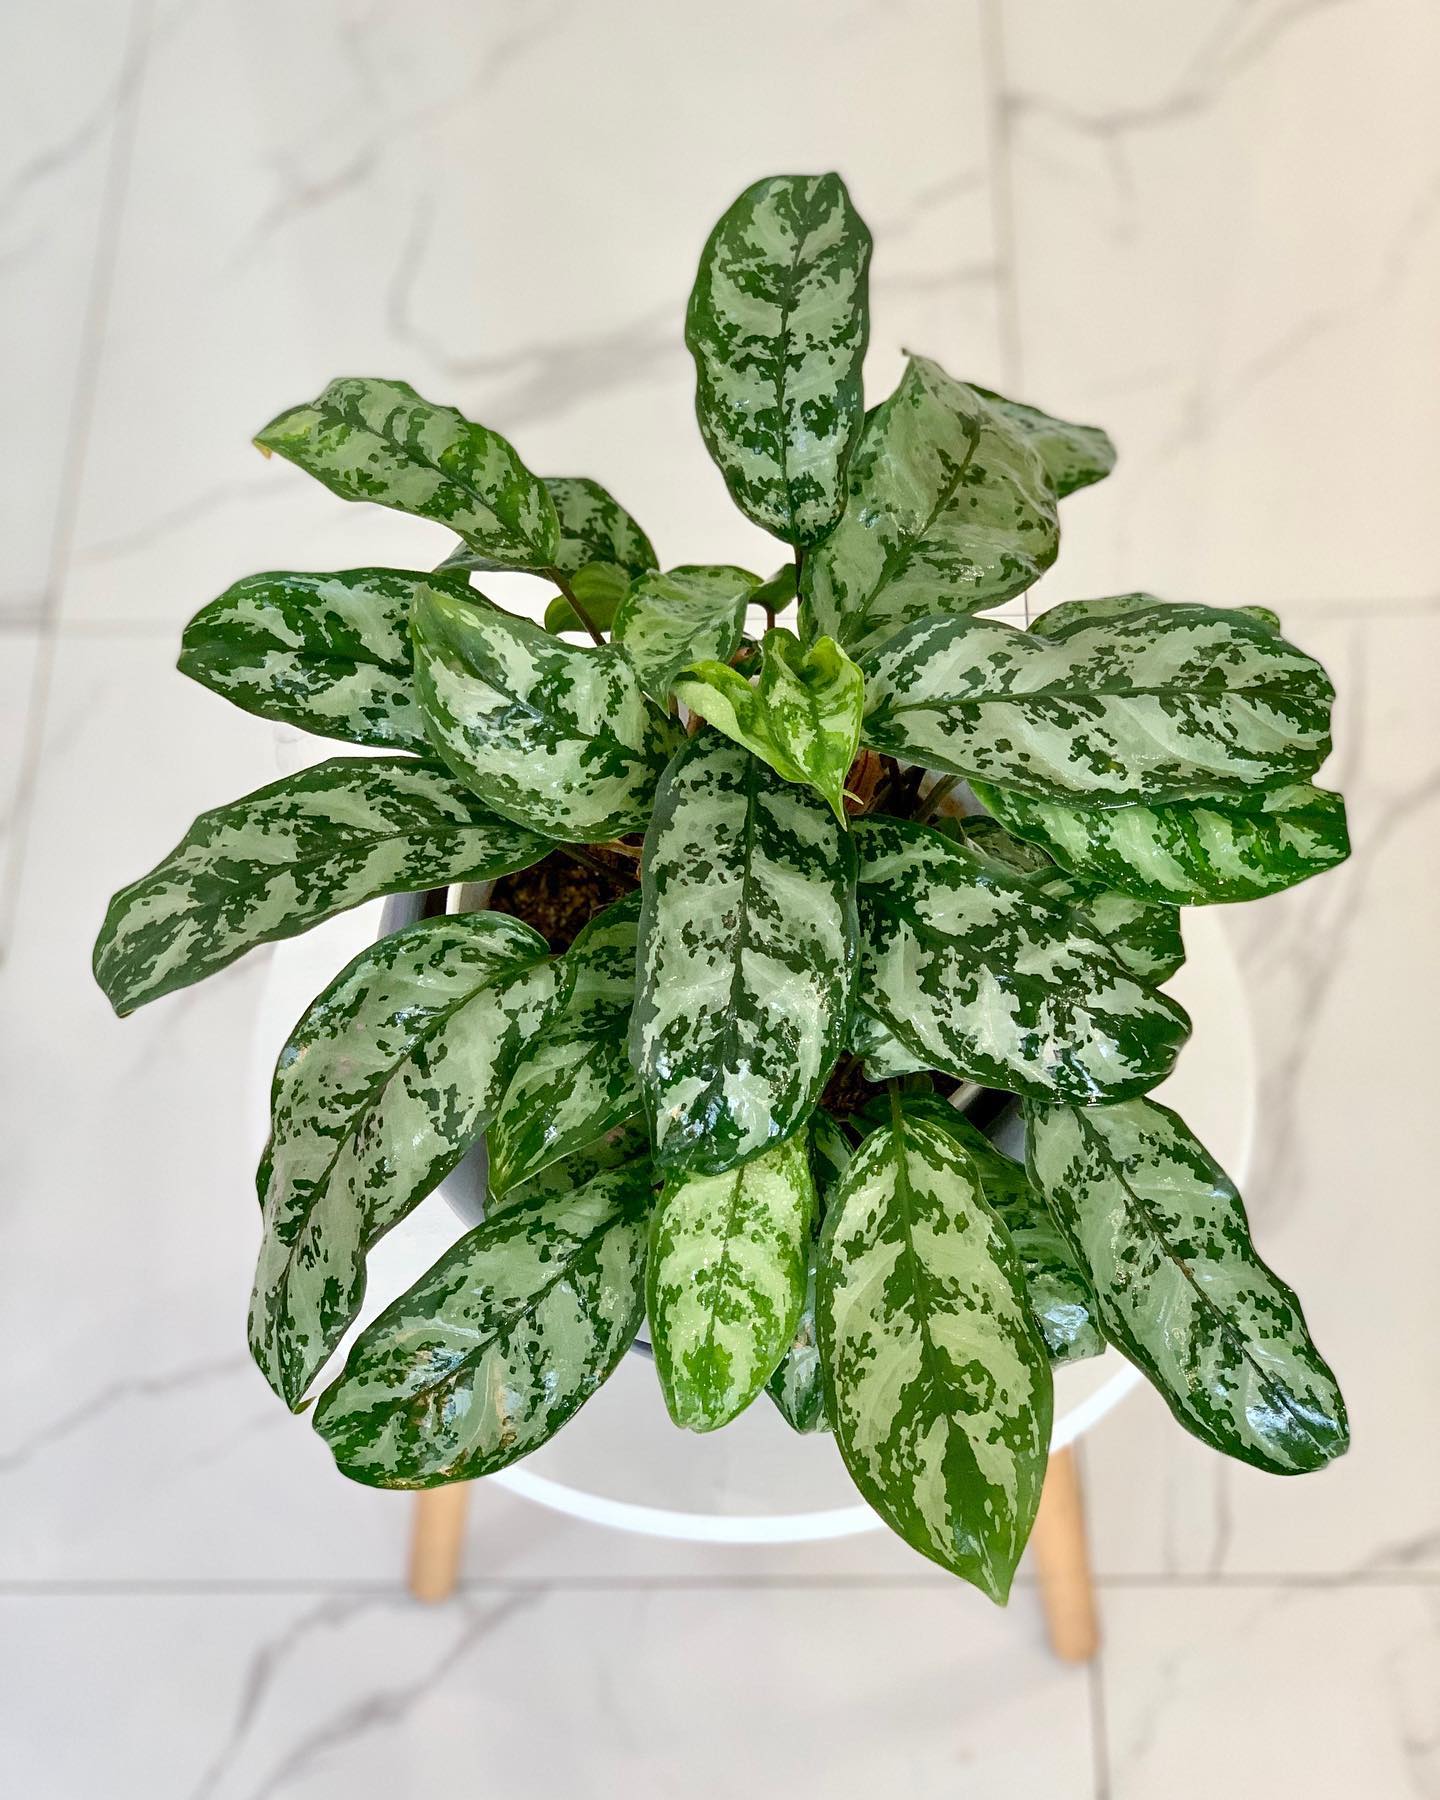 Aglaonema Chinese Evergreen - Pots For Plants